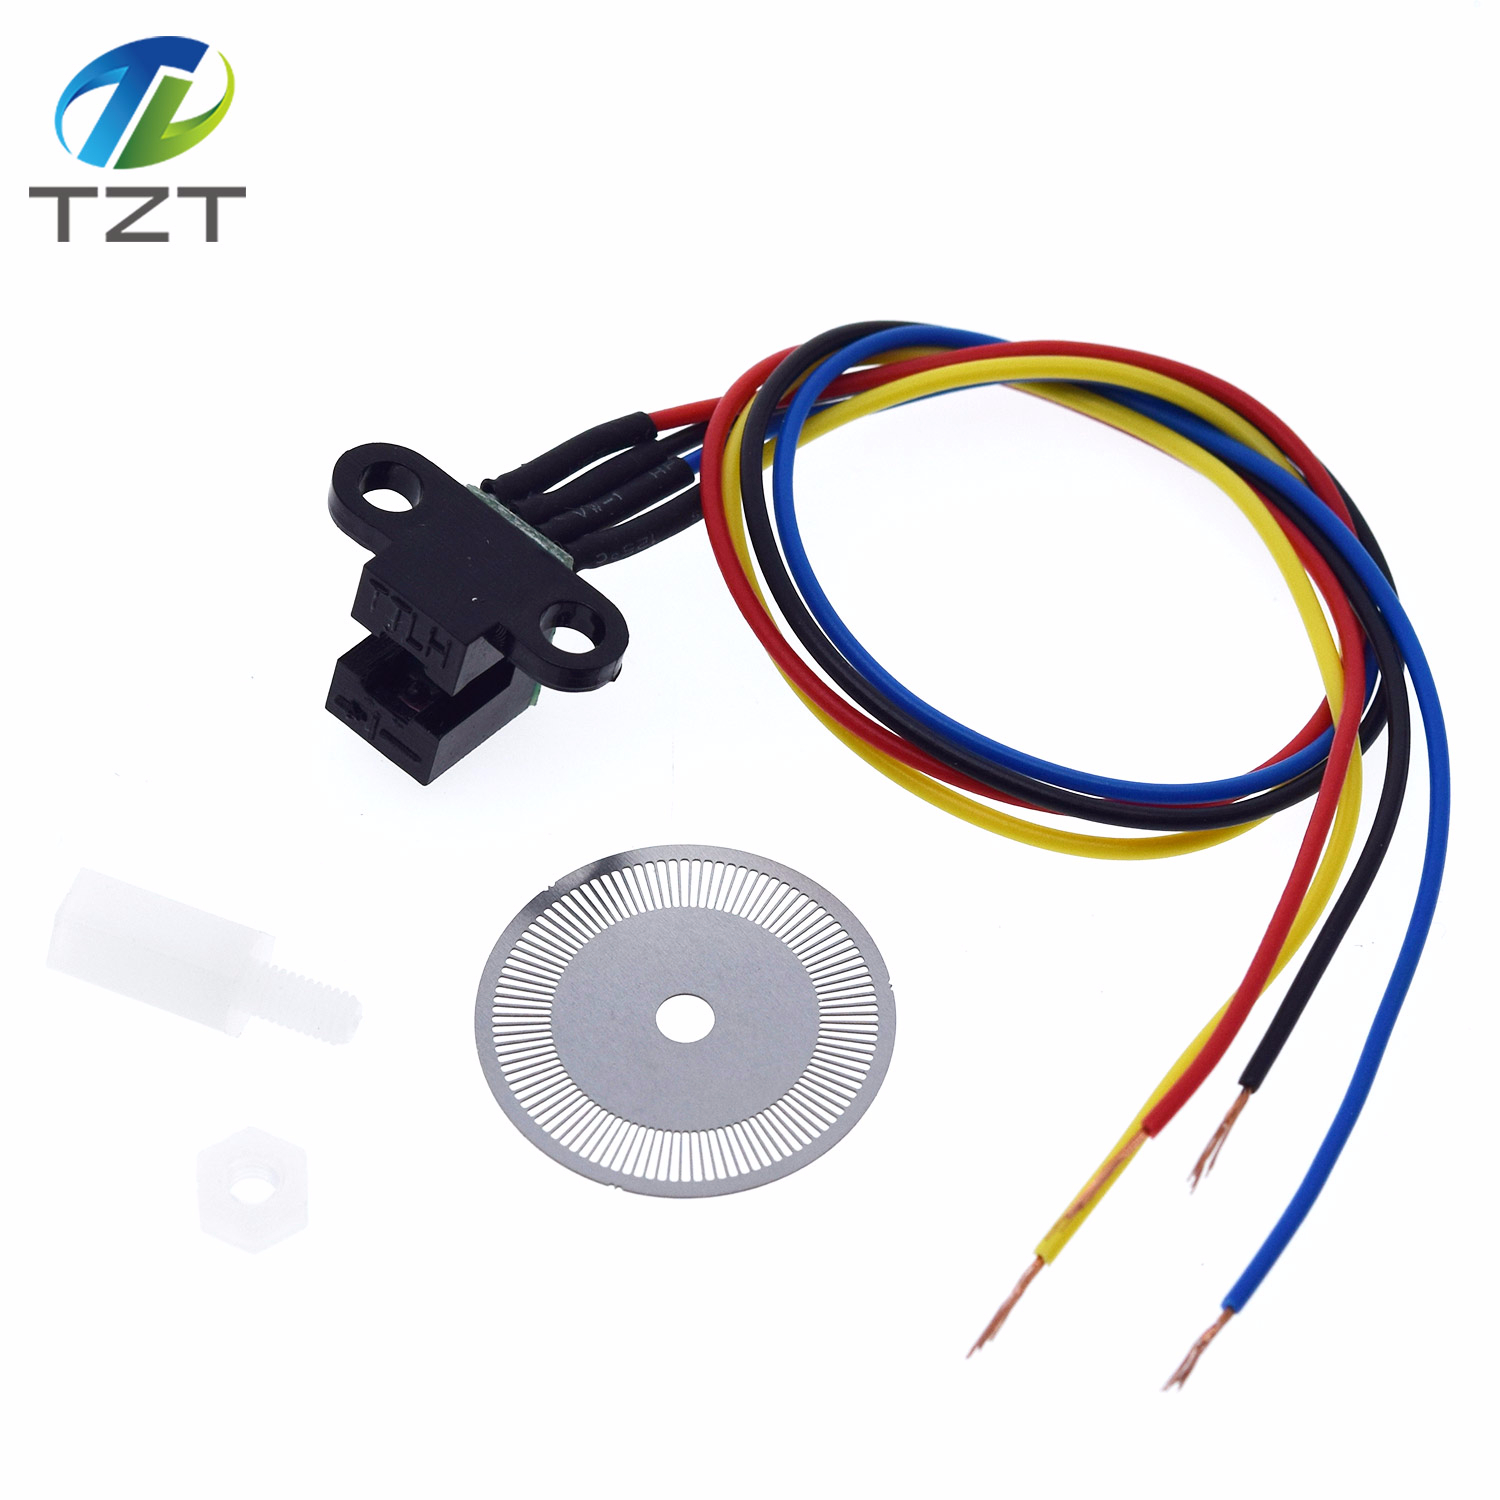 TZT Photoelectric Speed Sensor Encoder Coded Disc Code Wheel For Freescale Smart Car 5V For Arduino DIY